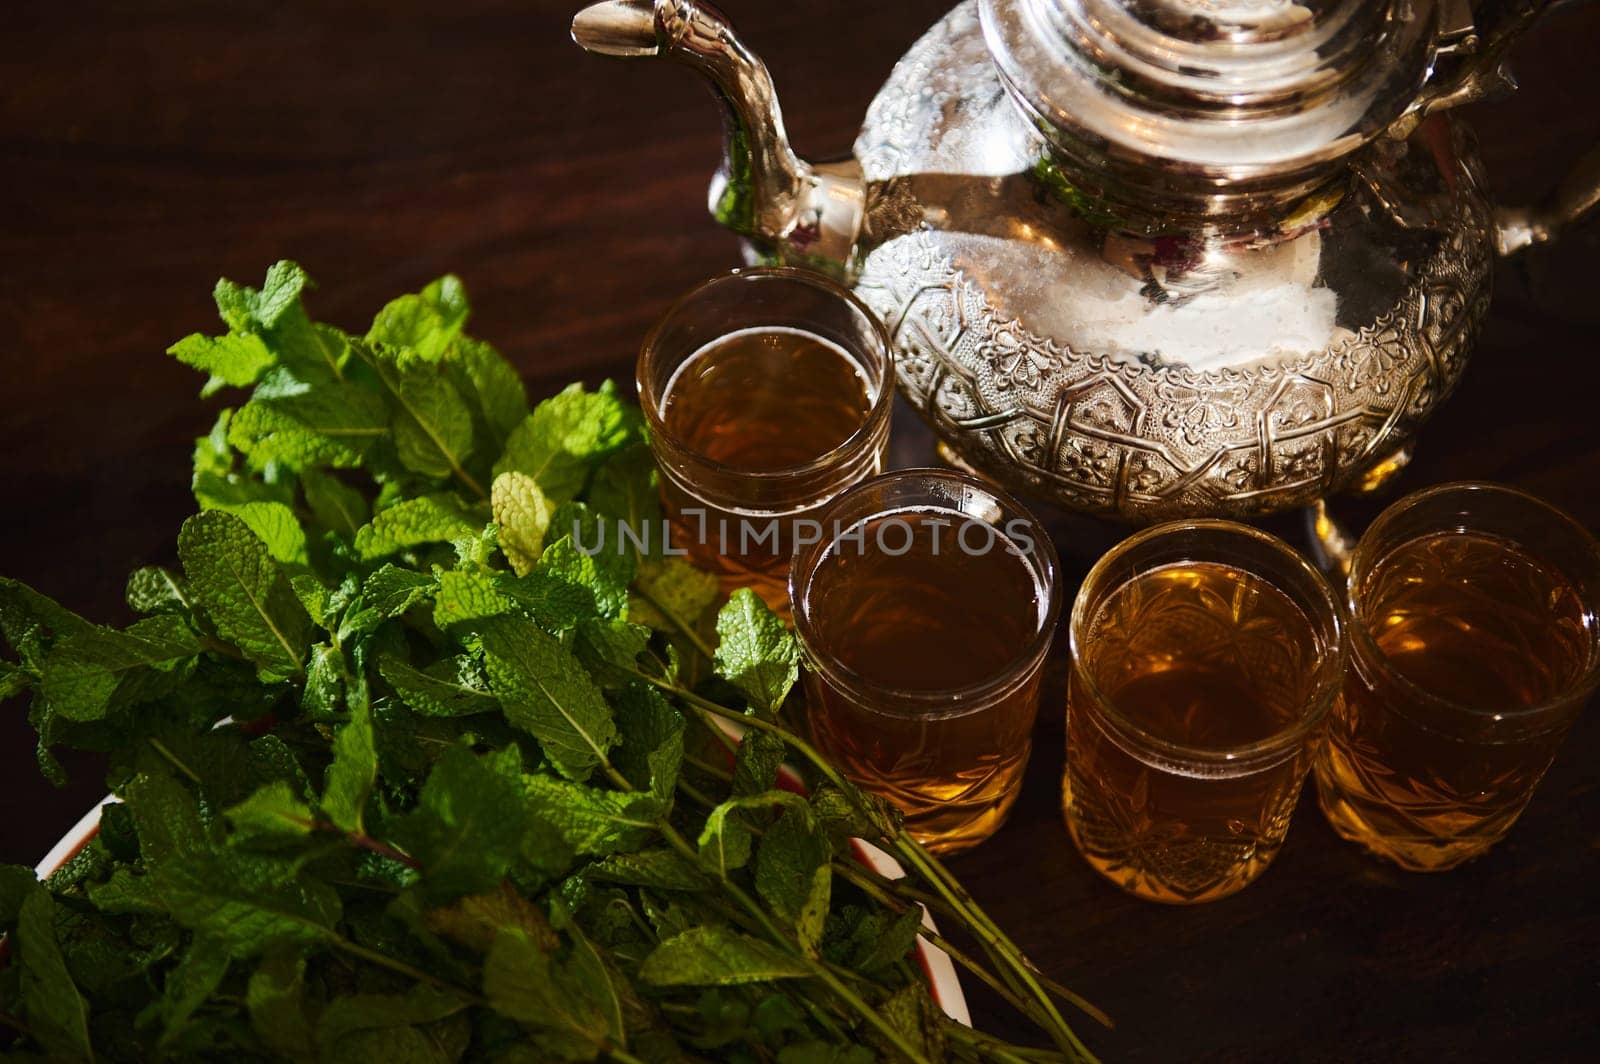 View from above Drinking glasses with fresh Moroccan tea with mint and silver traditional tea pot on wooden table. Enjoy a tea break in Moroccan traditions during Ftour Ftor at Ramadan or Aid Al Fitr